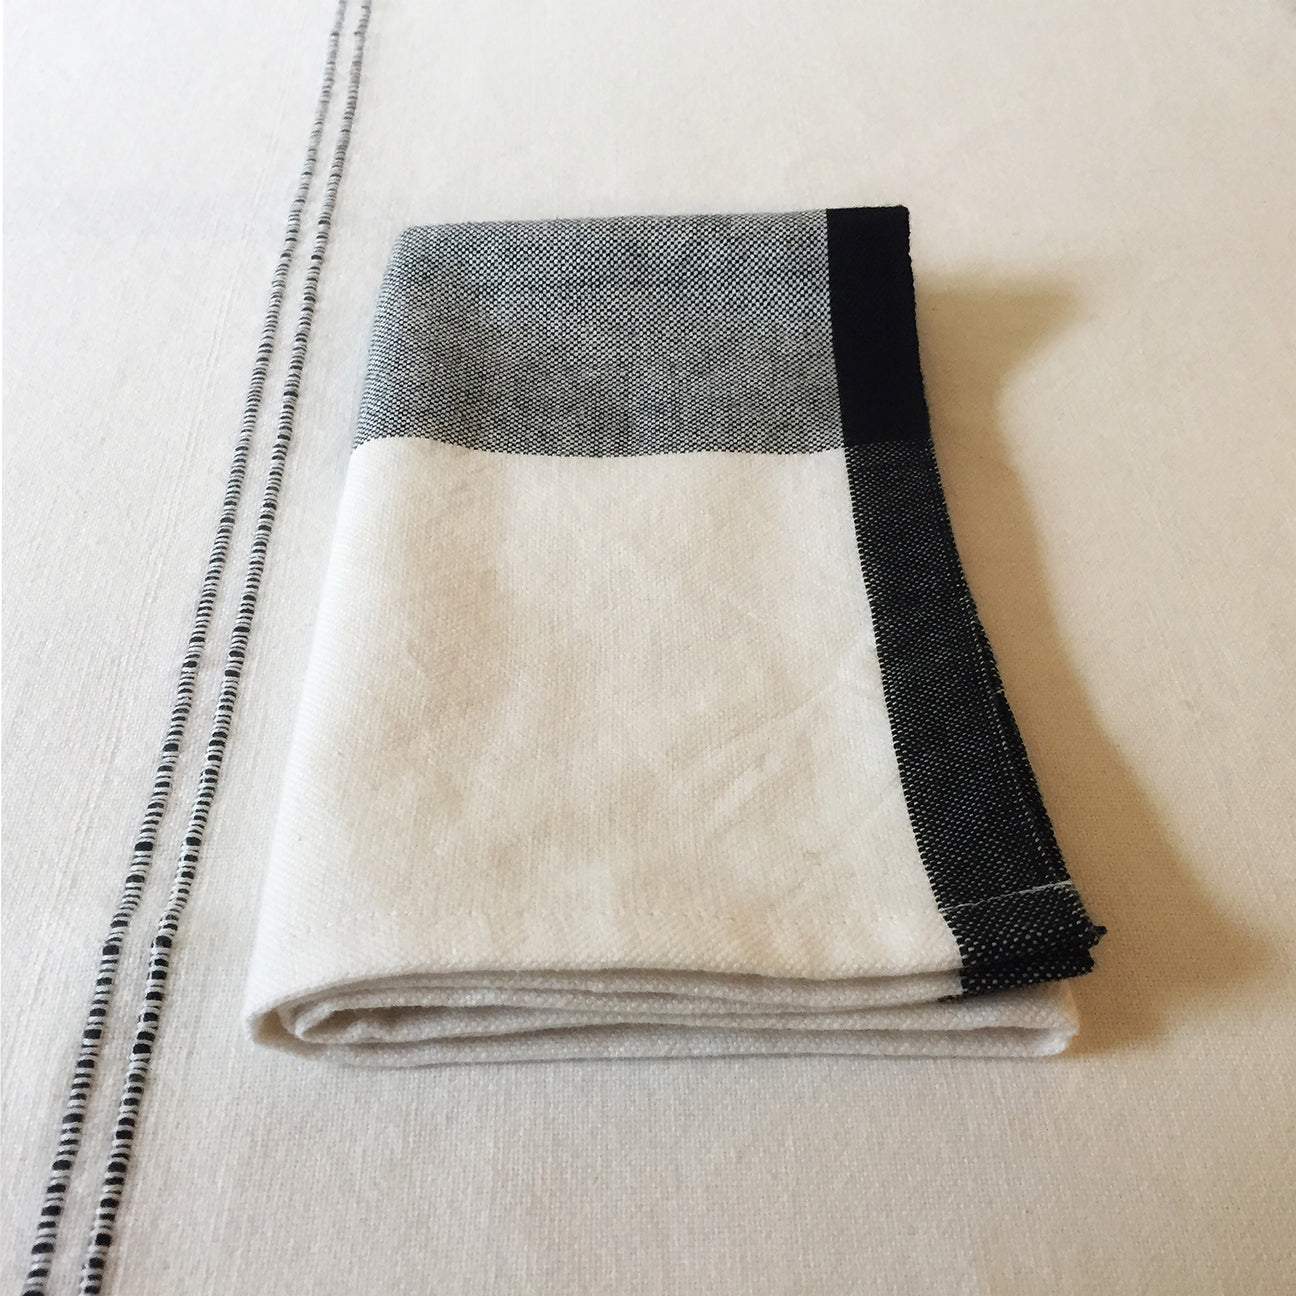 M+A NYC Color Block Napkin Kora with Black Band